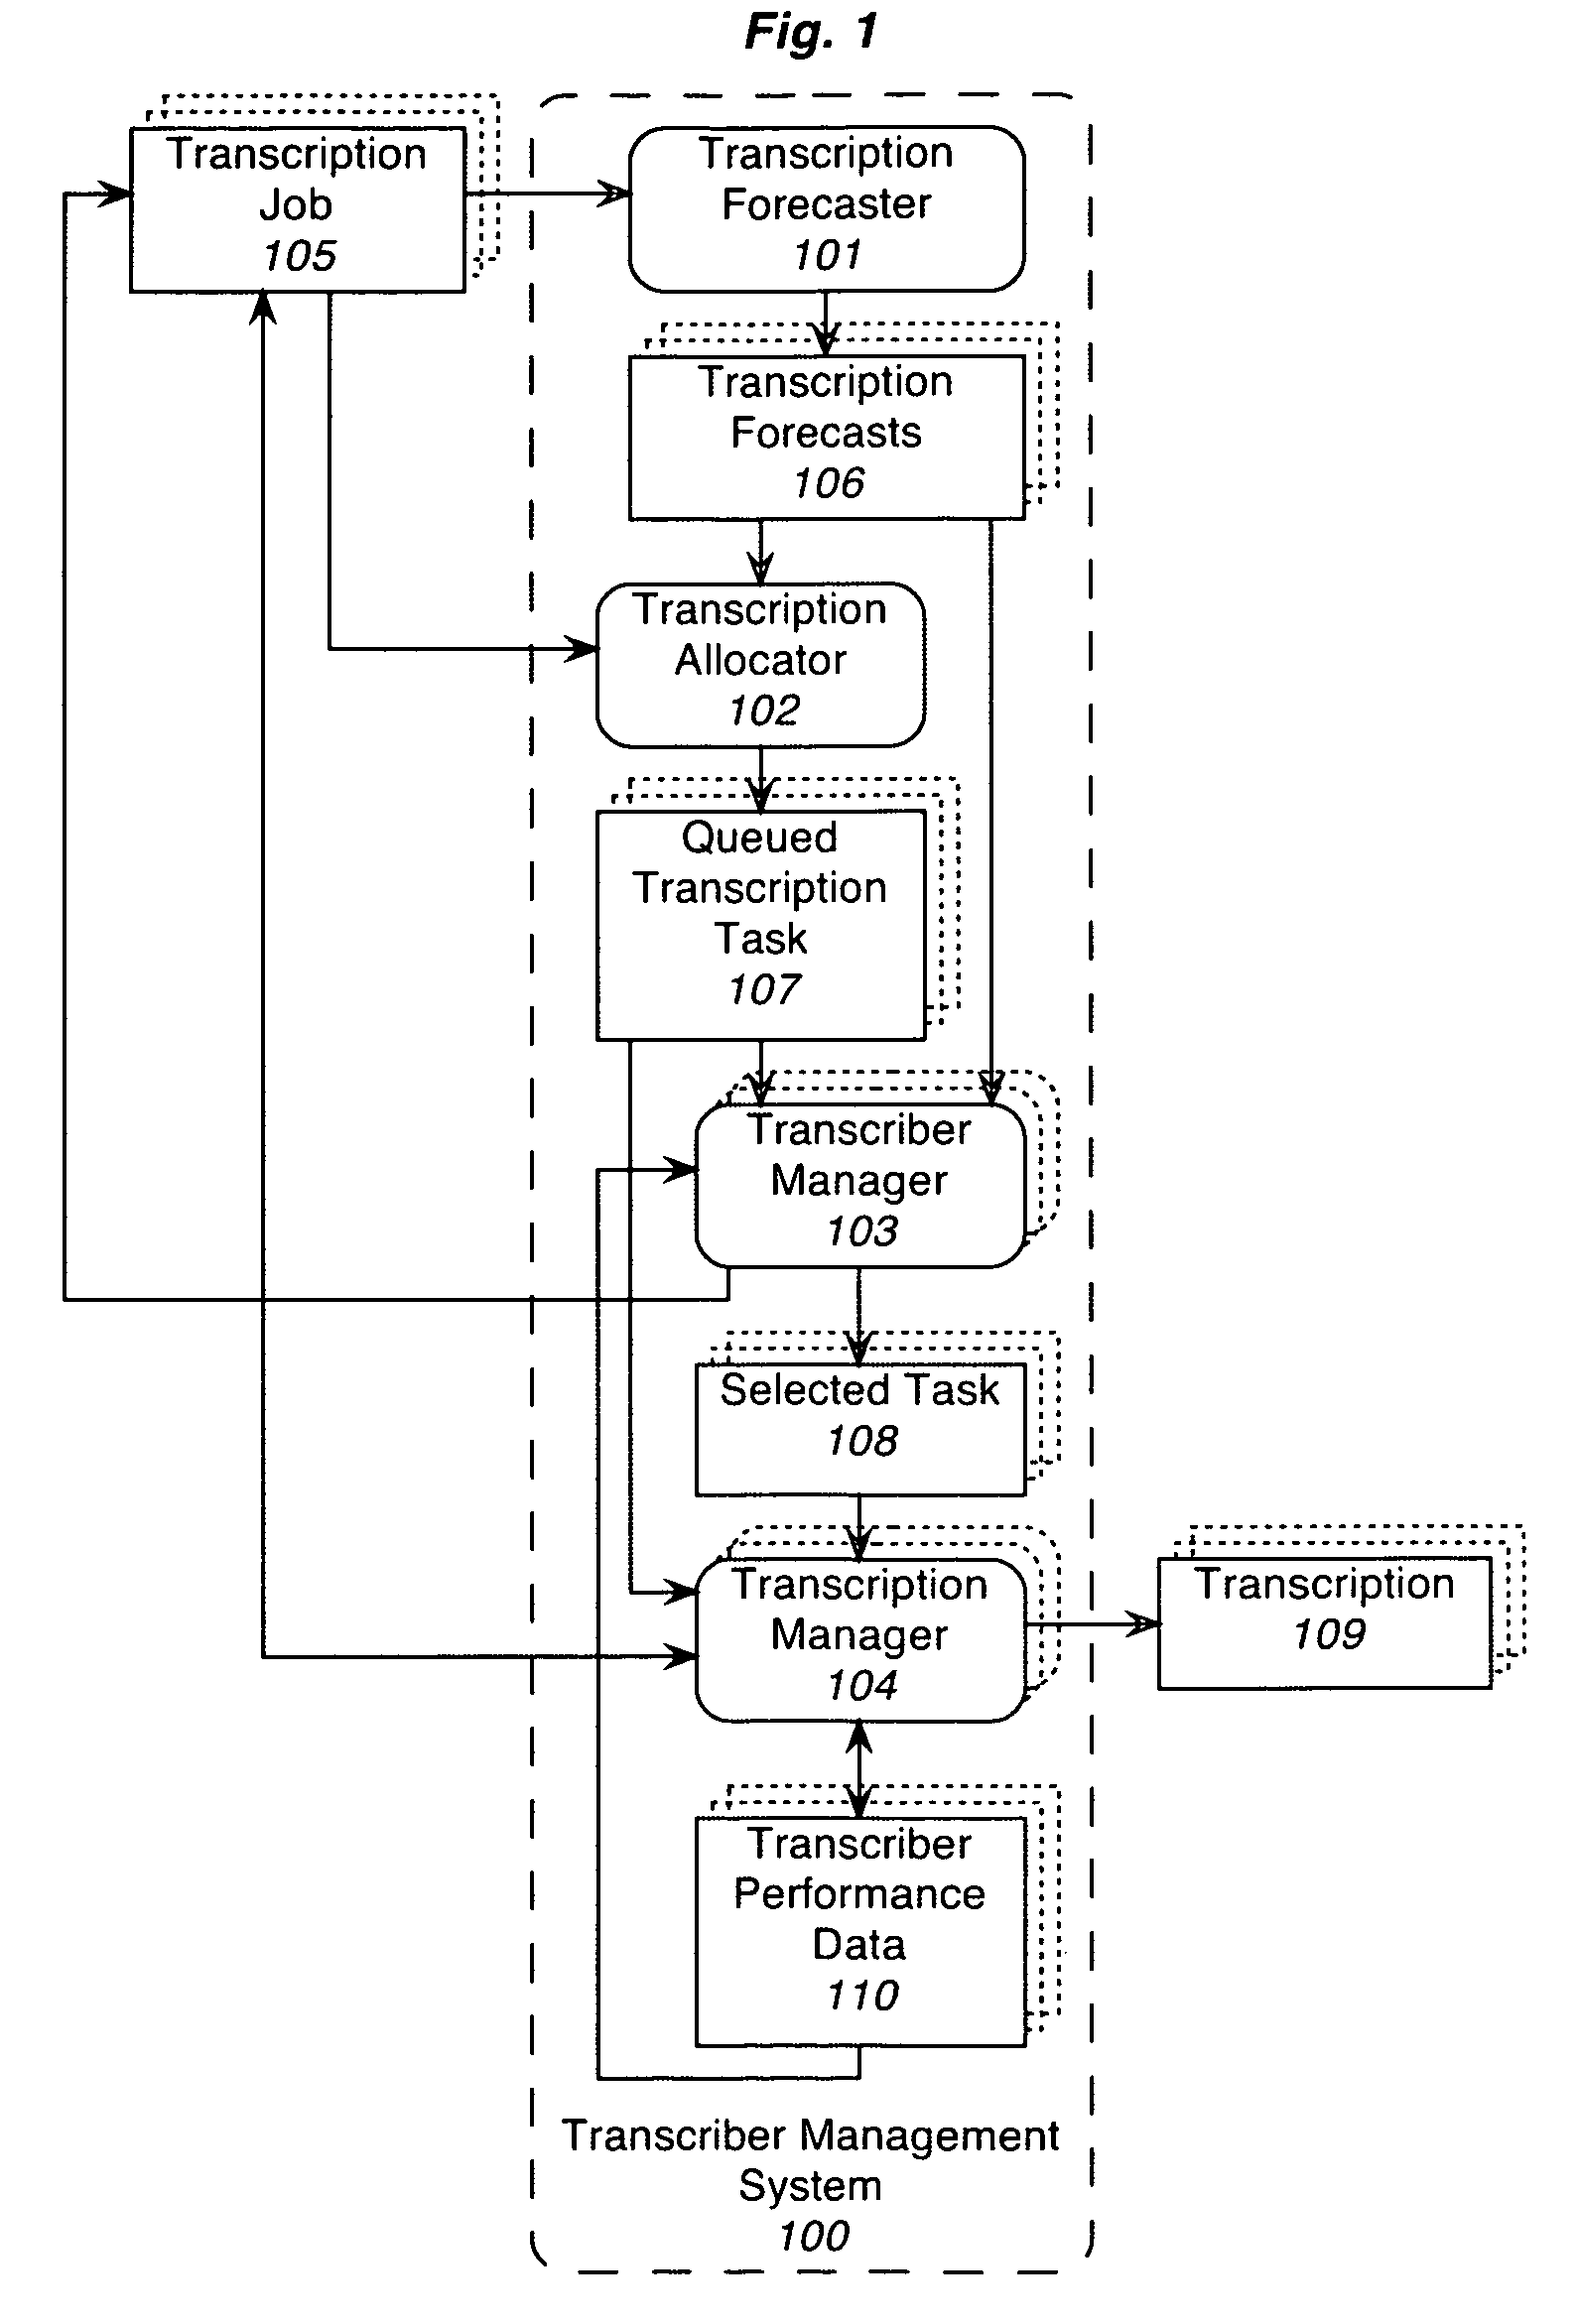 Method and system for efficient management of speech transcribers